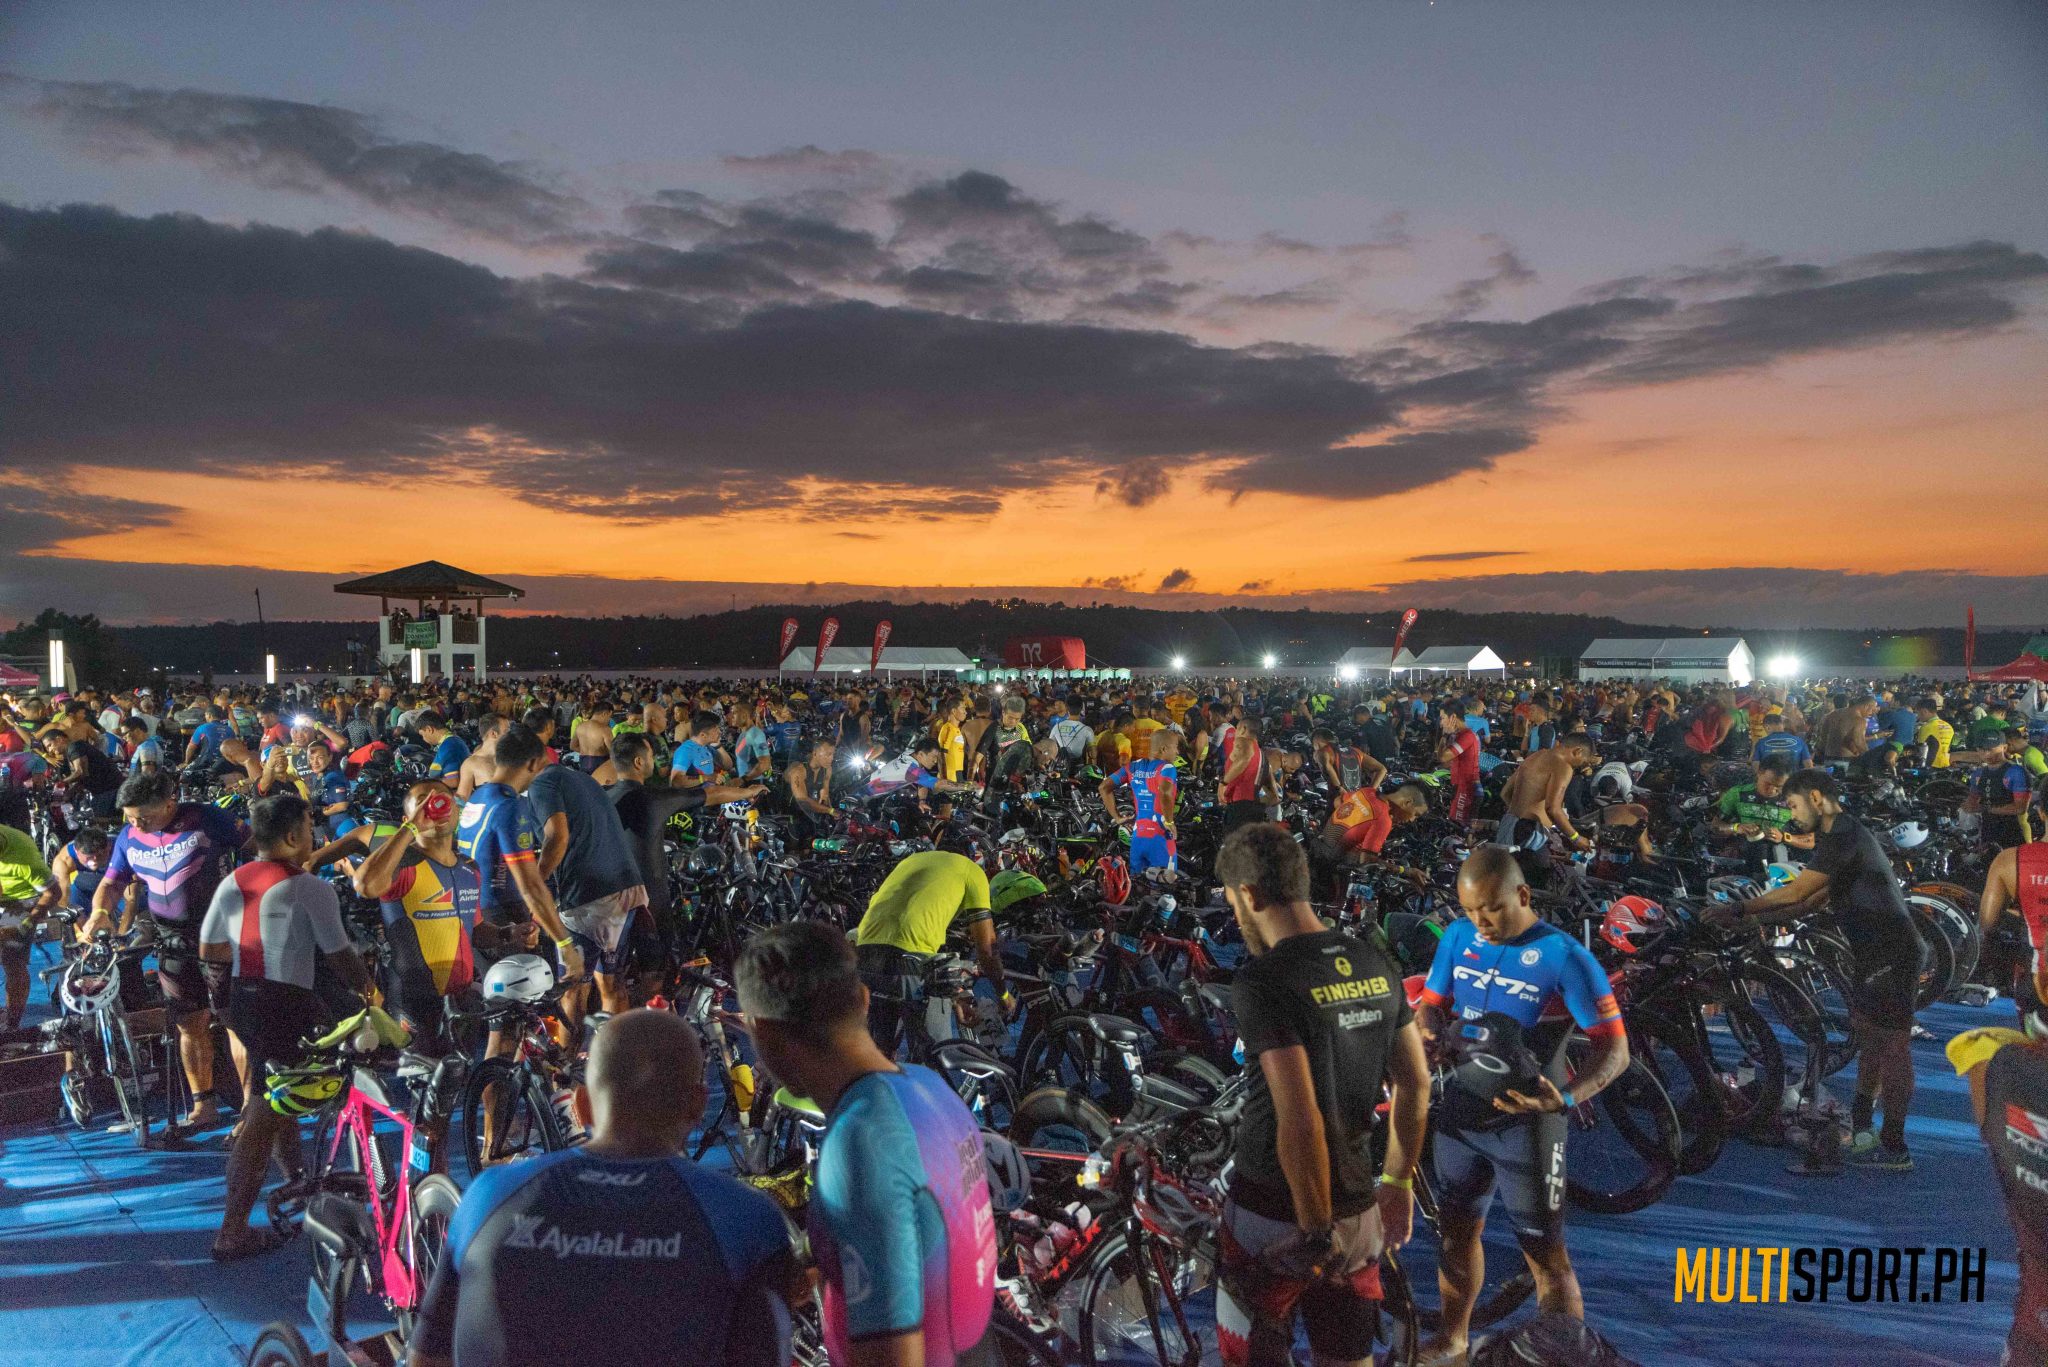 Nothing beats the feeling of getting ready for an Ironman race